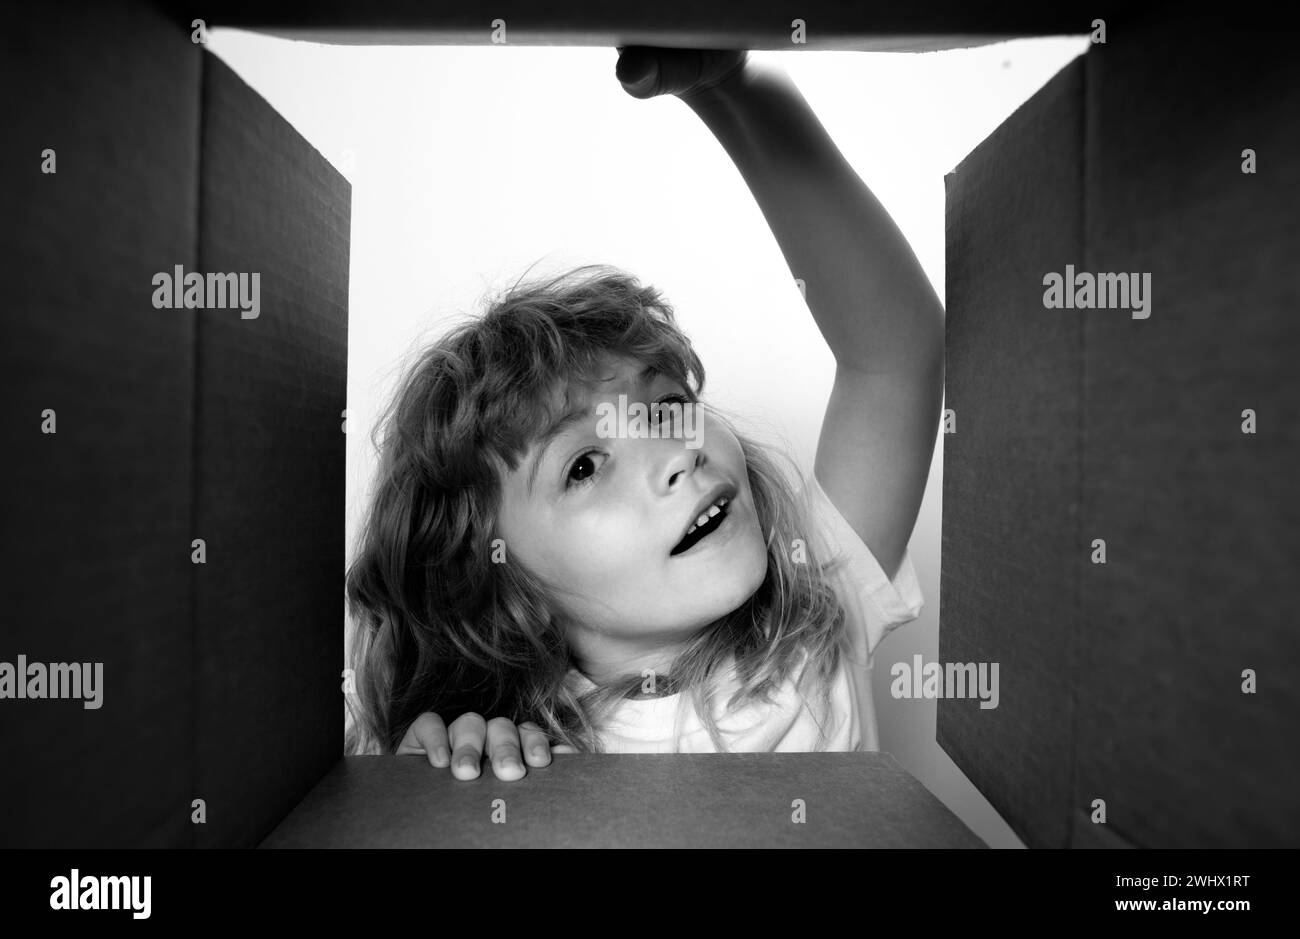 Kid unpacking and opening carton box, and looking inside with surprise face. Unpacking cardboard box for kids. Stock Photo